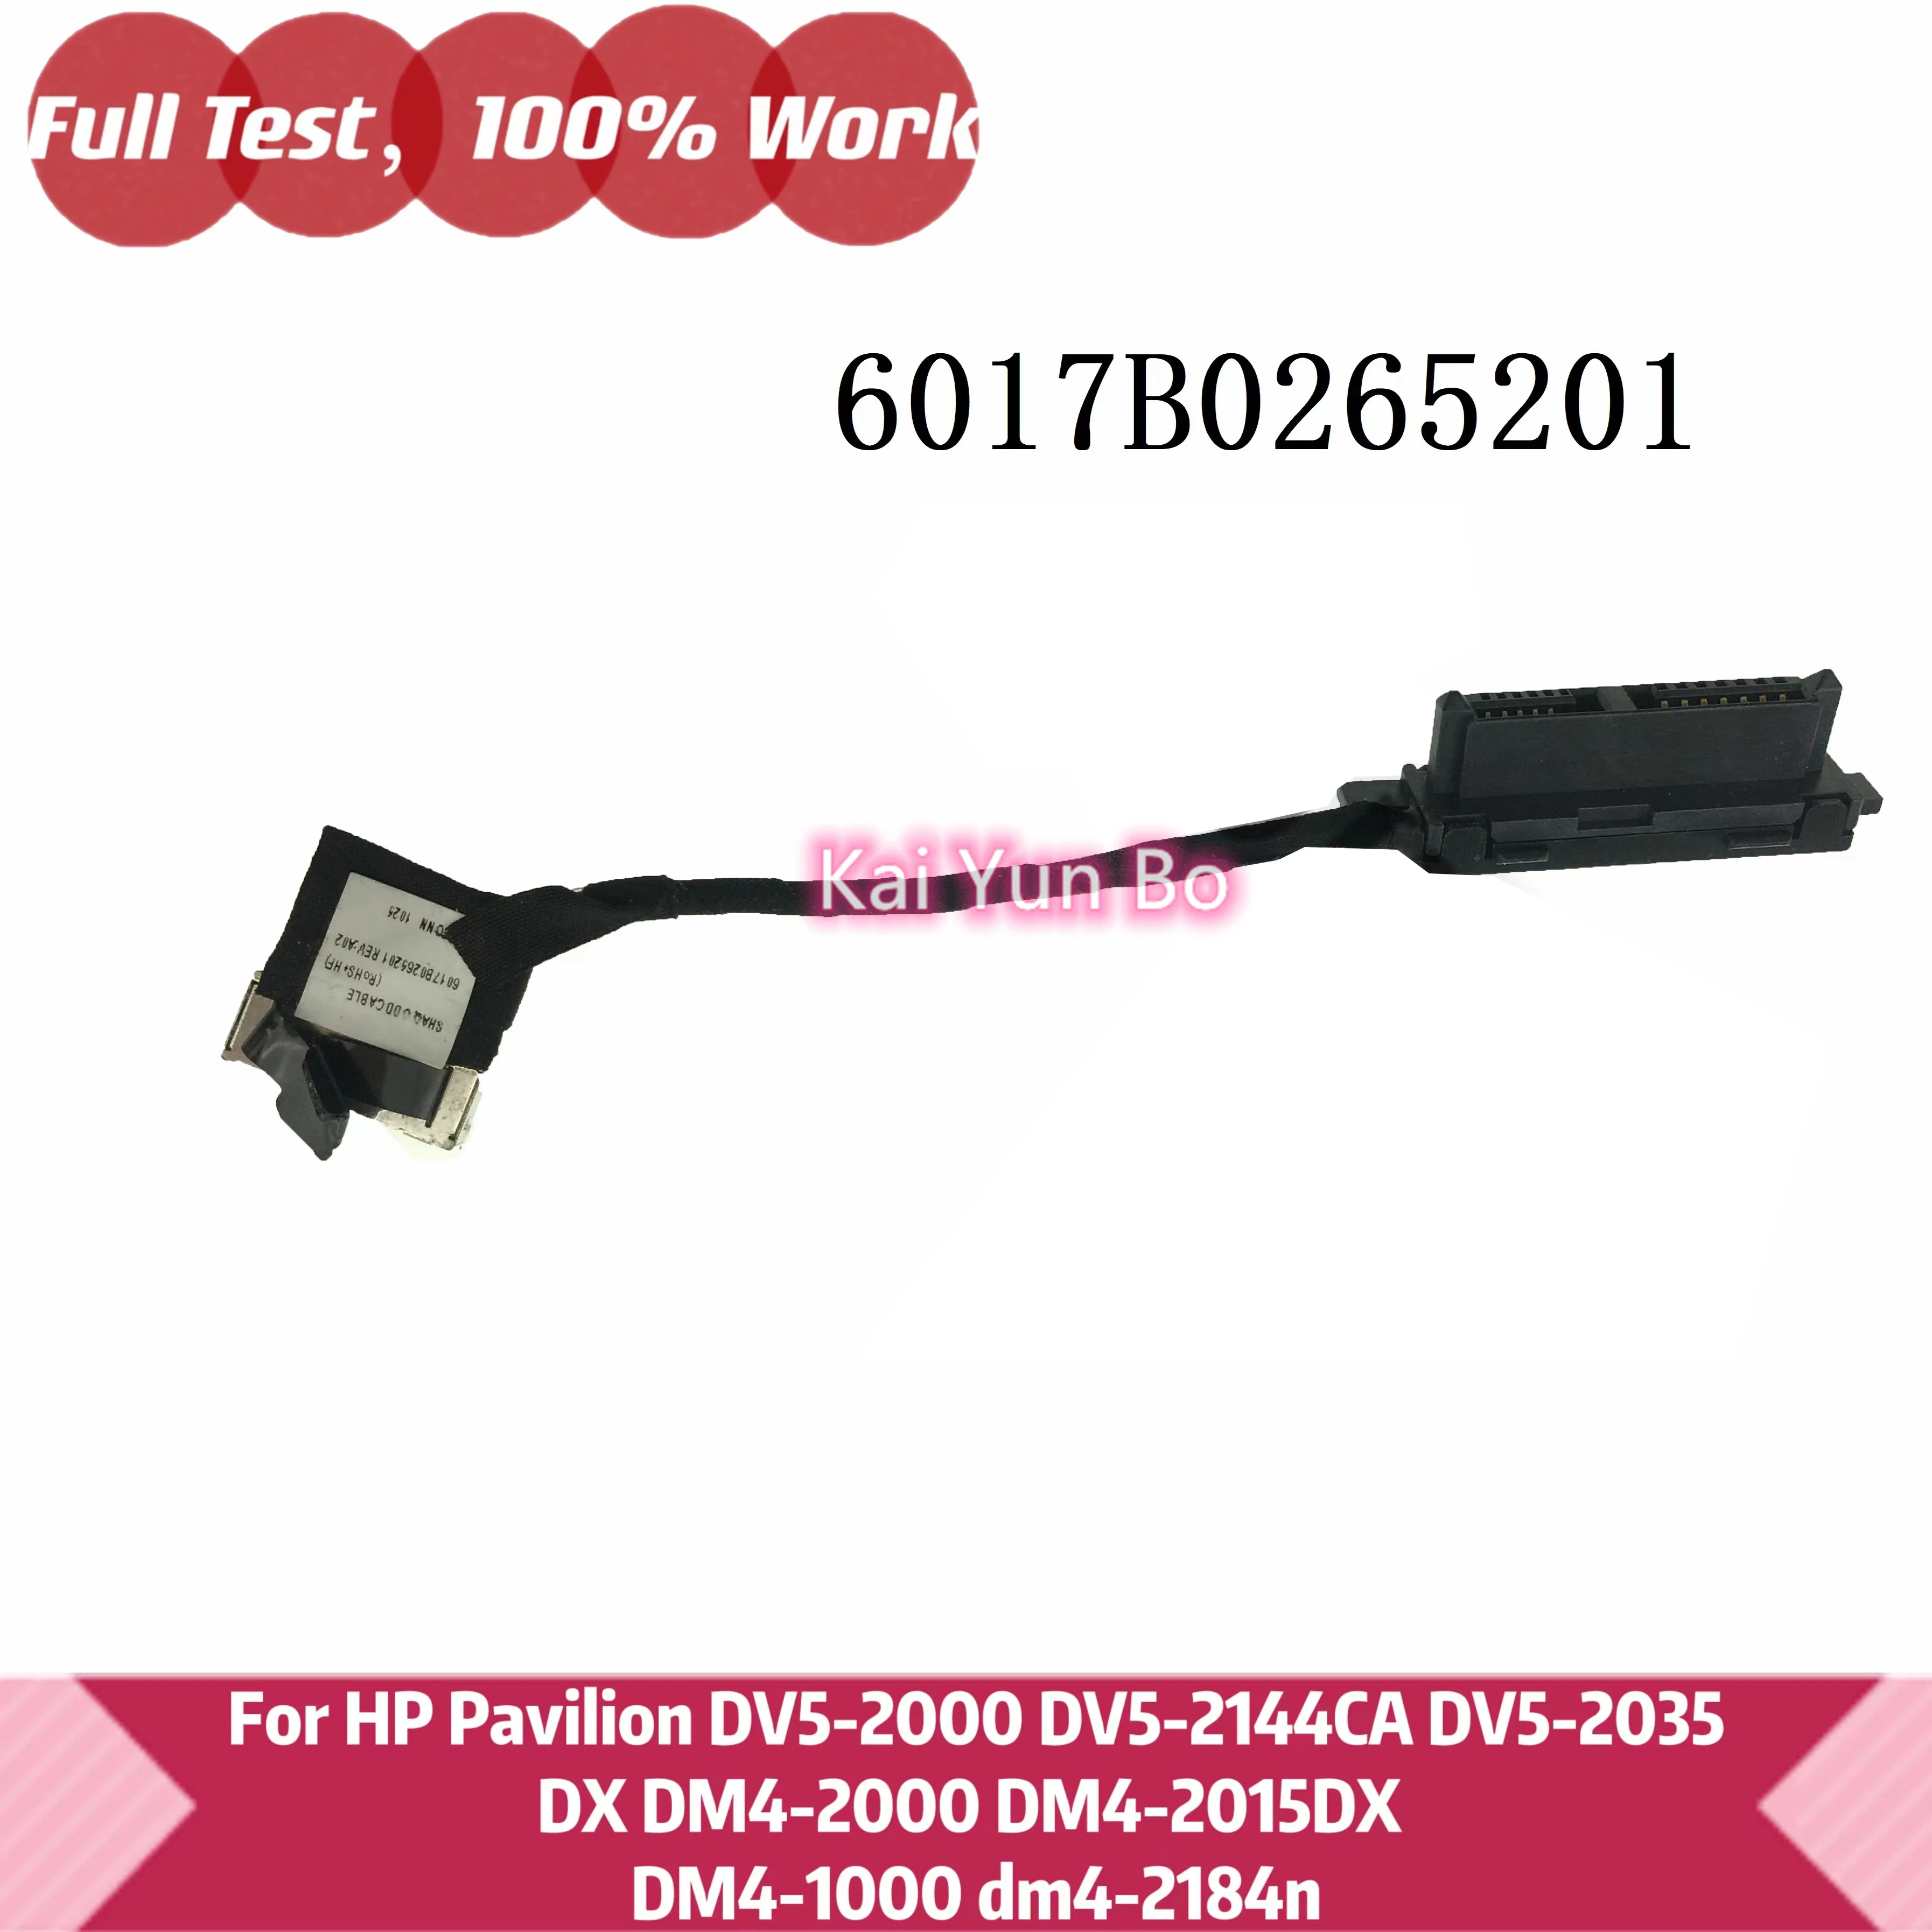 For HP Pavilion DV5-2000 DV5-2144CA DV5-2035DX 2000 DM4-2015DX DM4-1000 dm4-2184n Laptop DVD ODD Connector Cable 6017B0265201